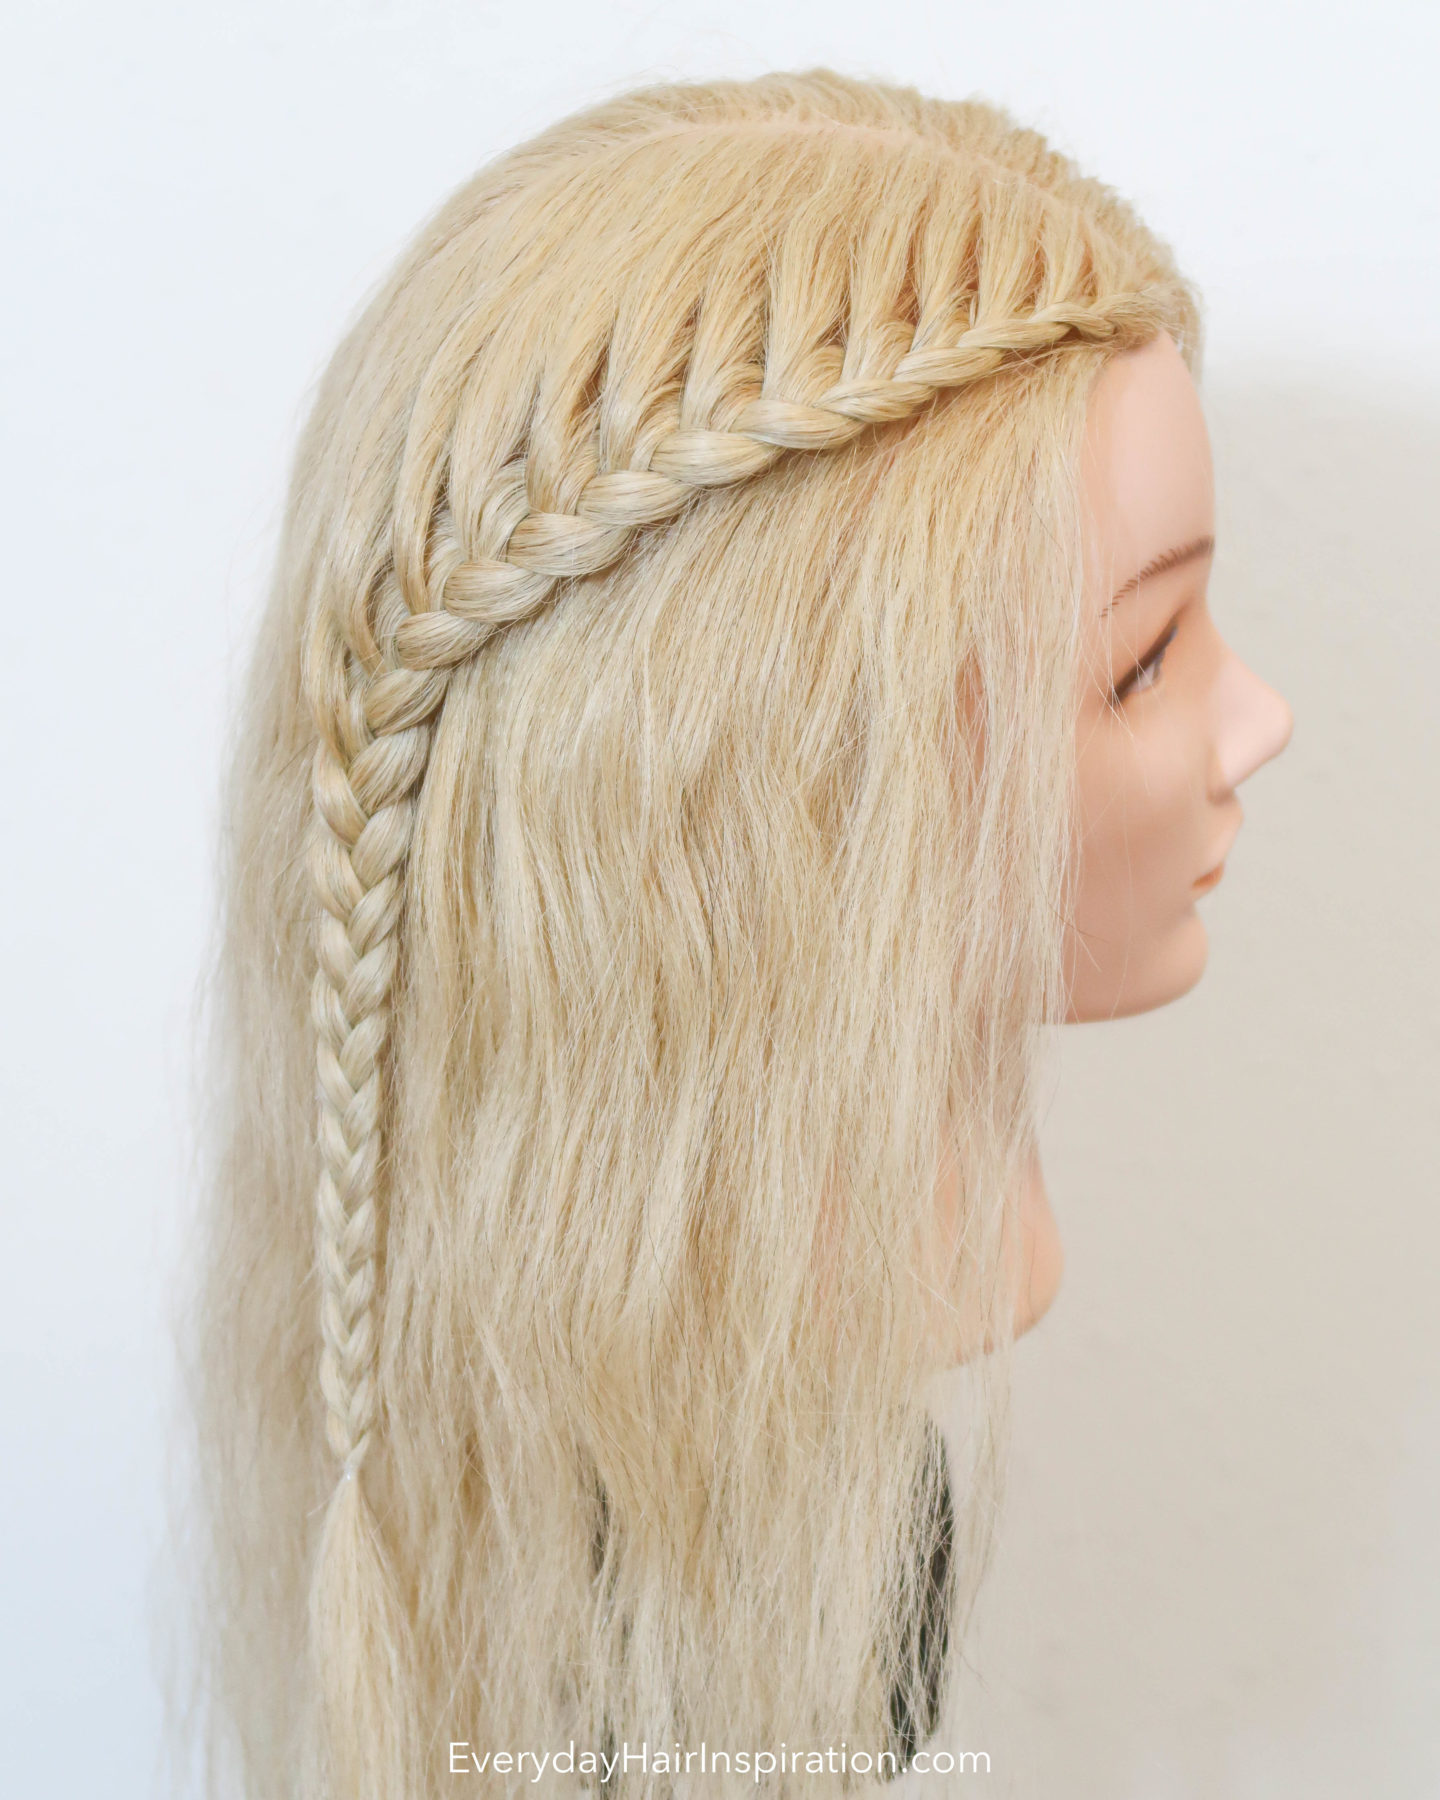 How To Dutch Braid Your Hair: A Step-by-Step Guide